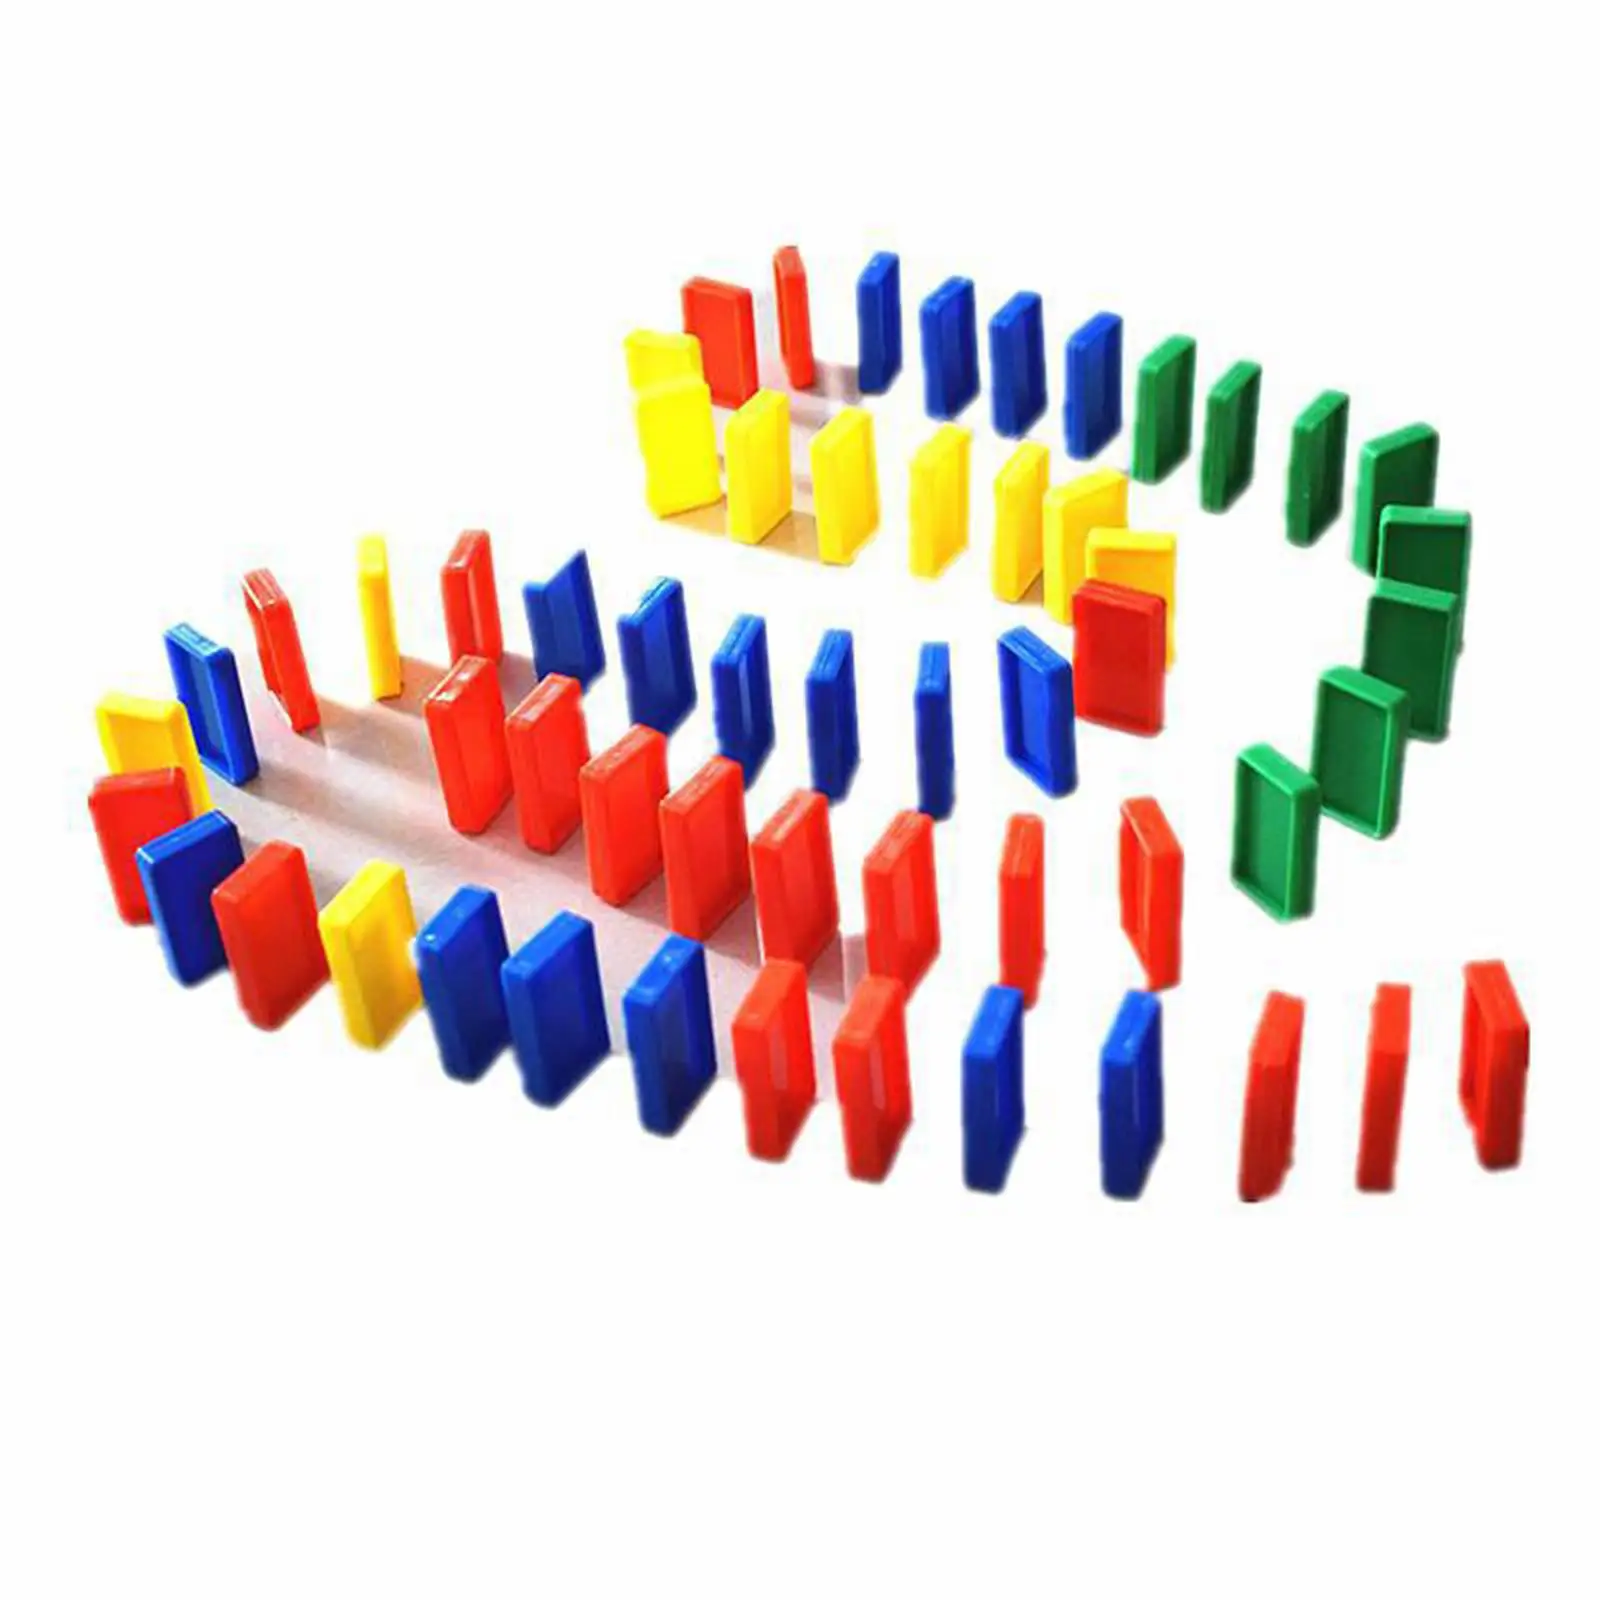 100x Dominoes Train Blocks Set Building Educational Play Toy for Children Girls Boys Creative Gifts